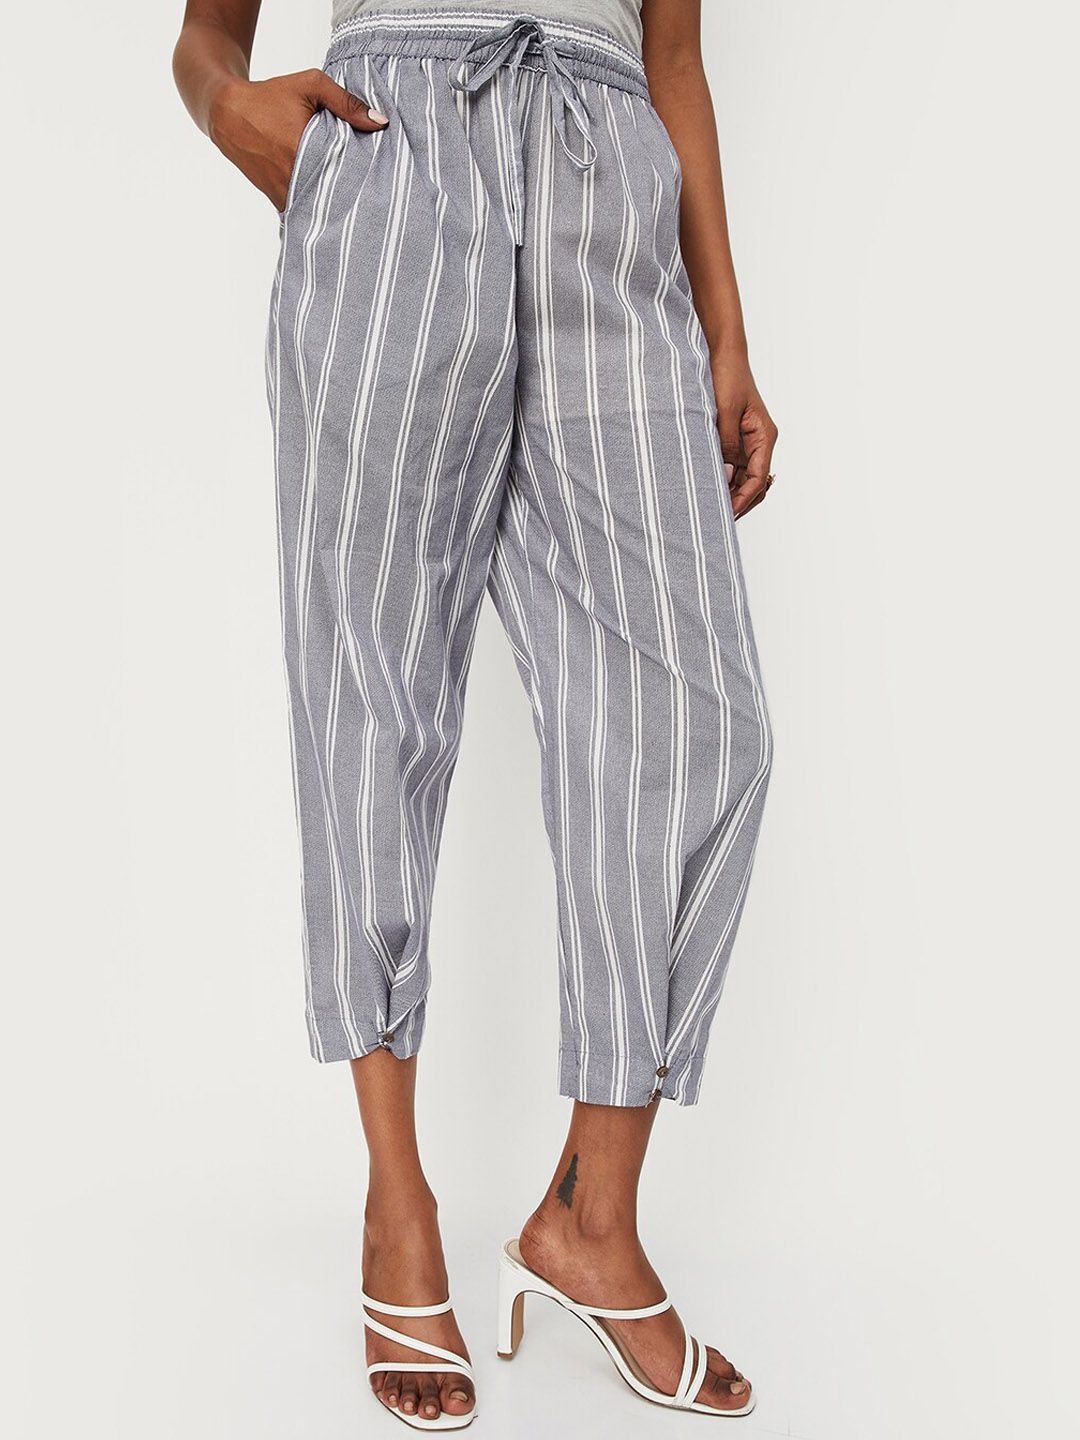 max Women Grey Striped Culottes Trousers Price in India